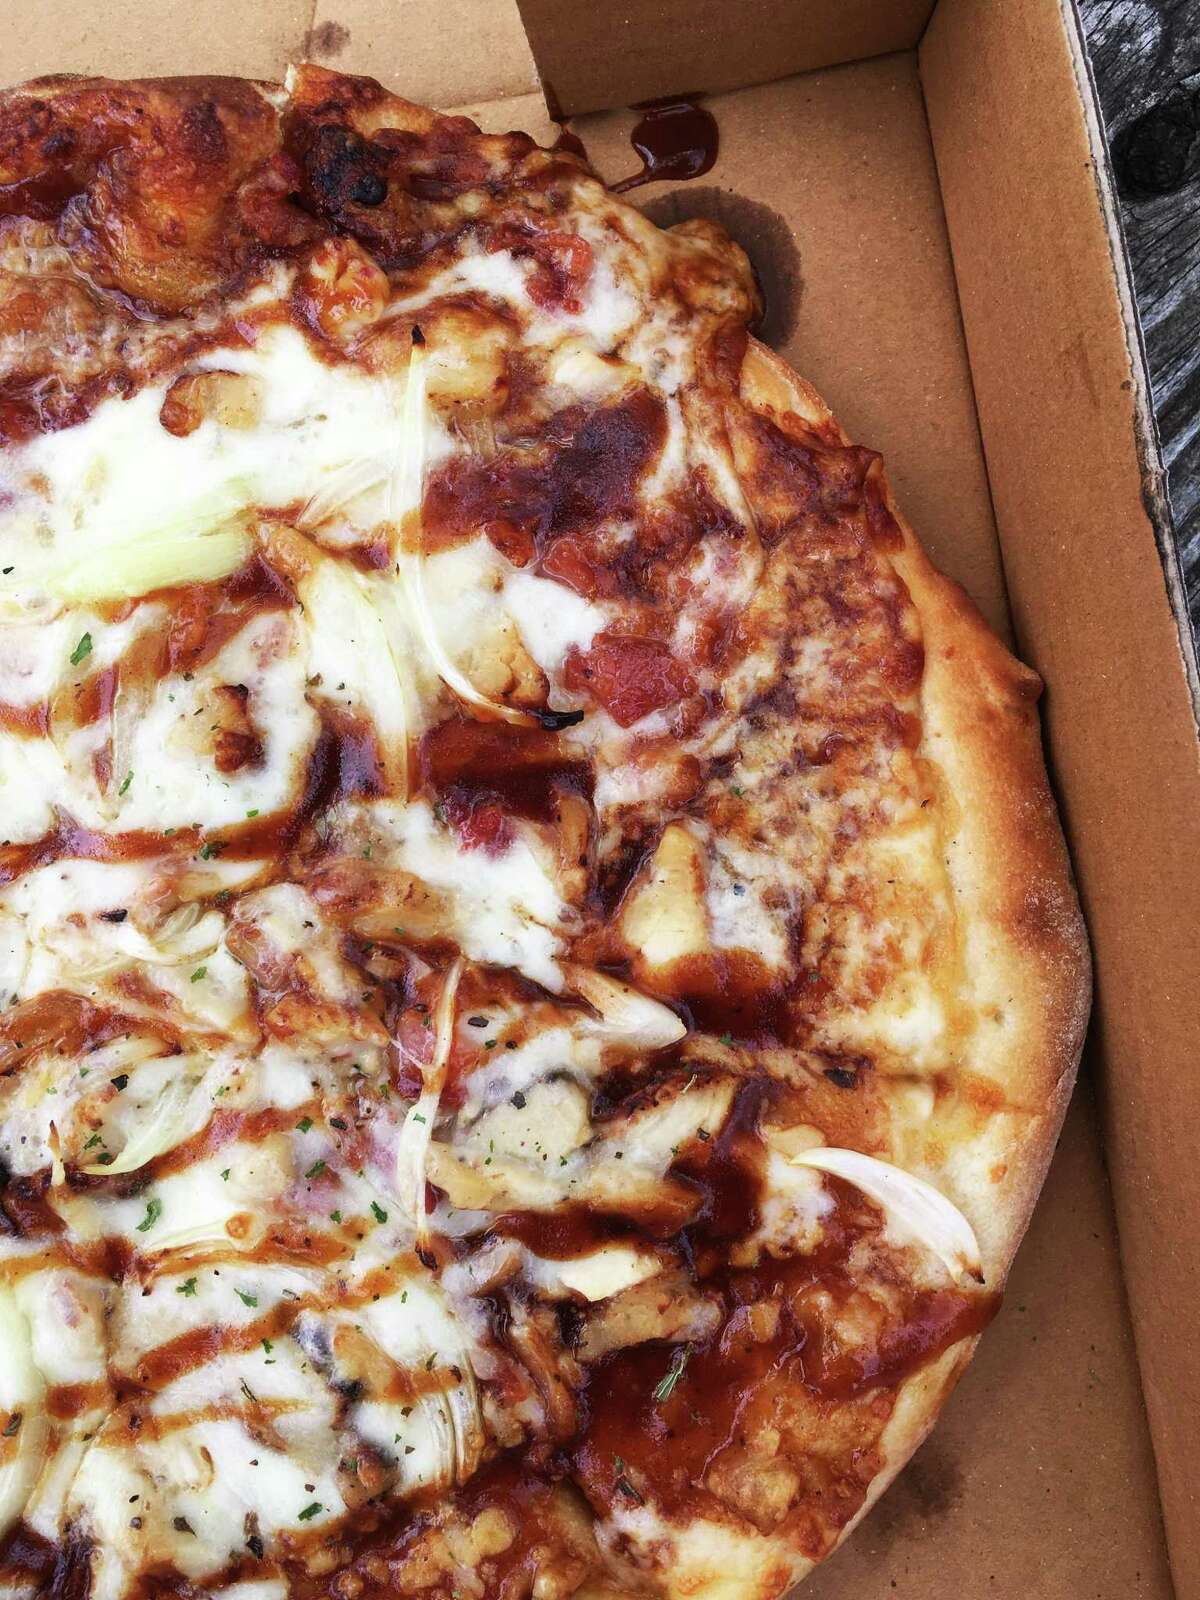 The barbecue chicken pizza at Rami's is loaded with a mixture of sweet barbecue sauce, white meat chicken, onions and bacon.